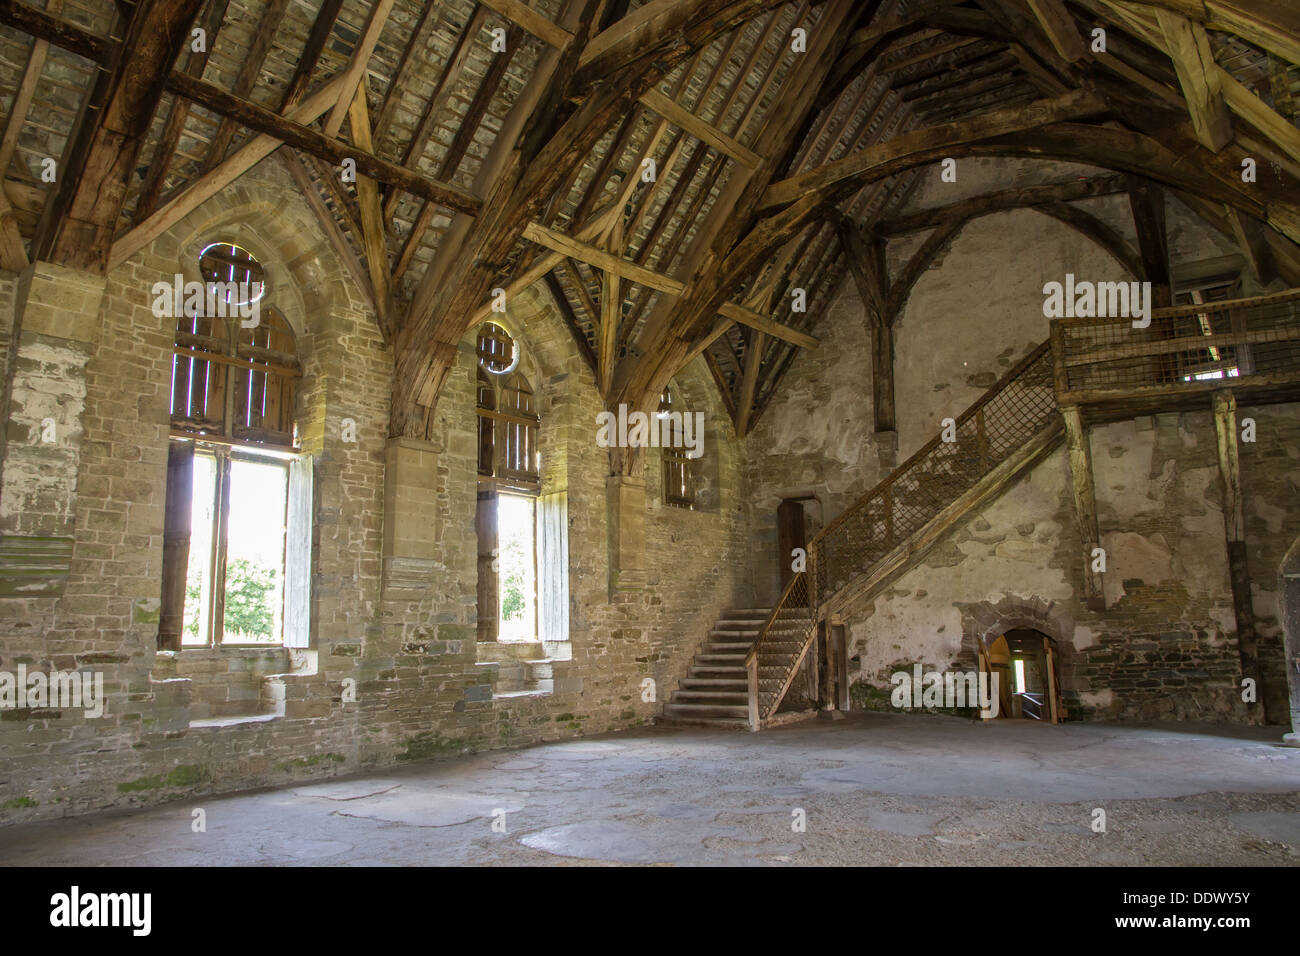 Inside the banqueting hall at Stokesay Castle in Shropshire. Stock Photo